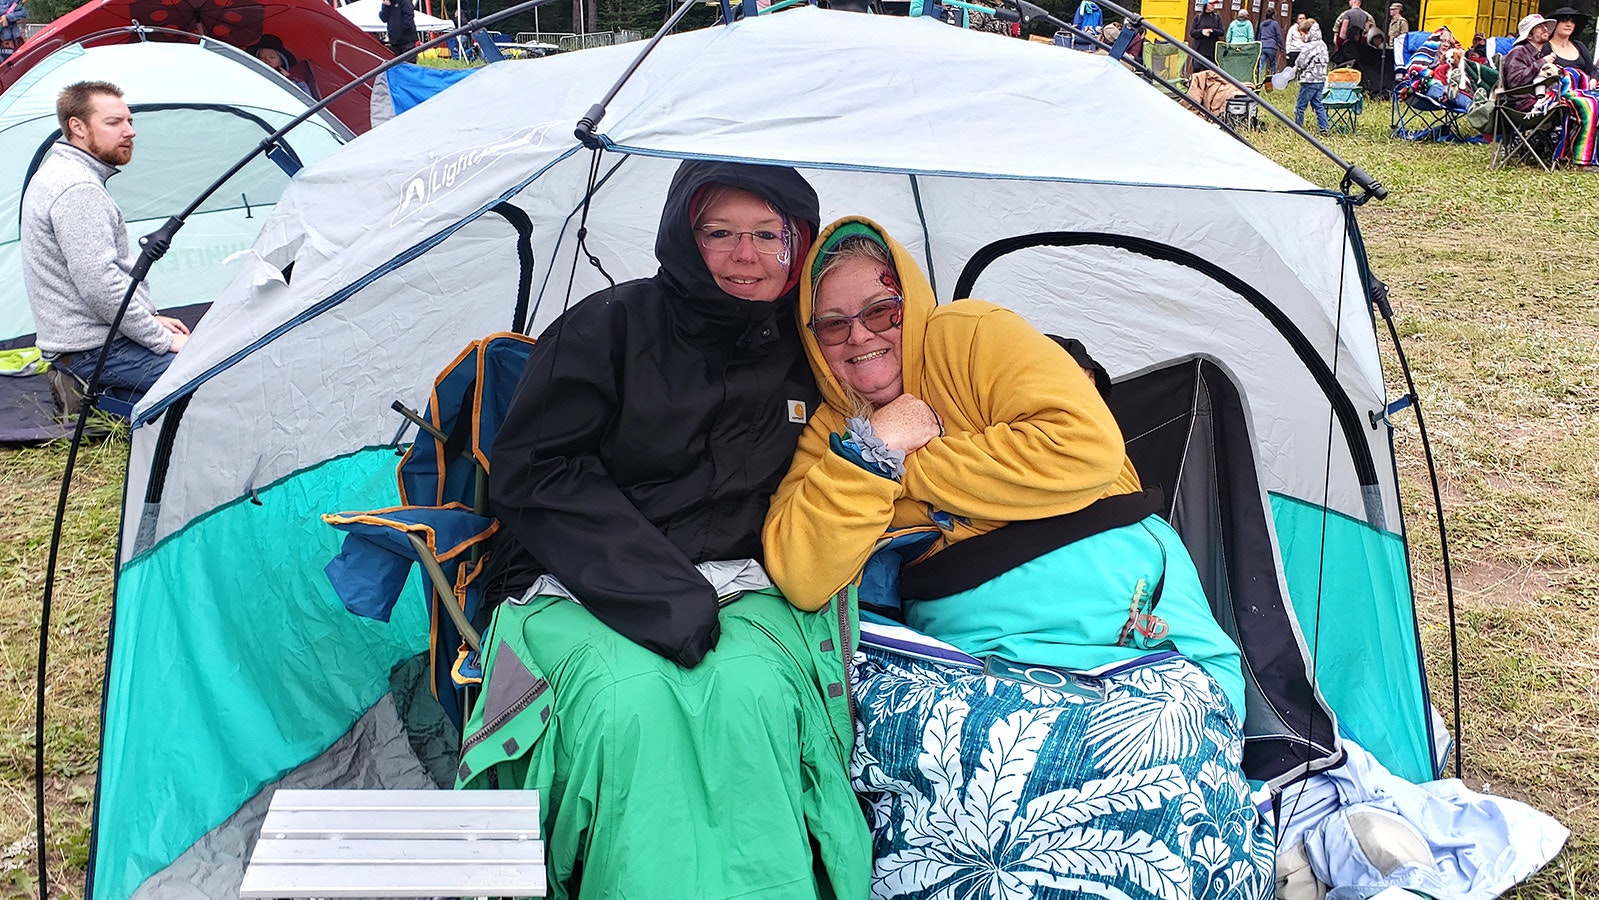 Kelly Buckley and Robbie Literas huddle under sweatshirts and blankets with a popup tent. They were enjoying themselves in spite of the chilly weather Saturday evening.